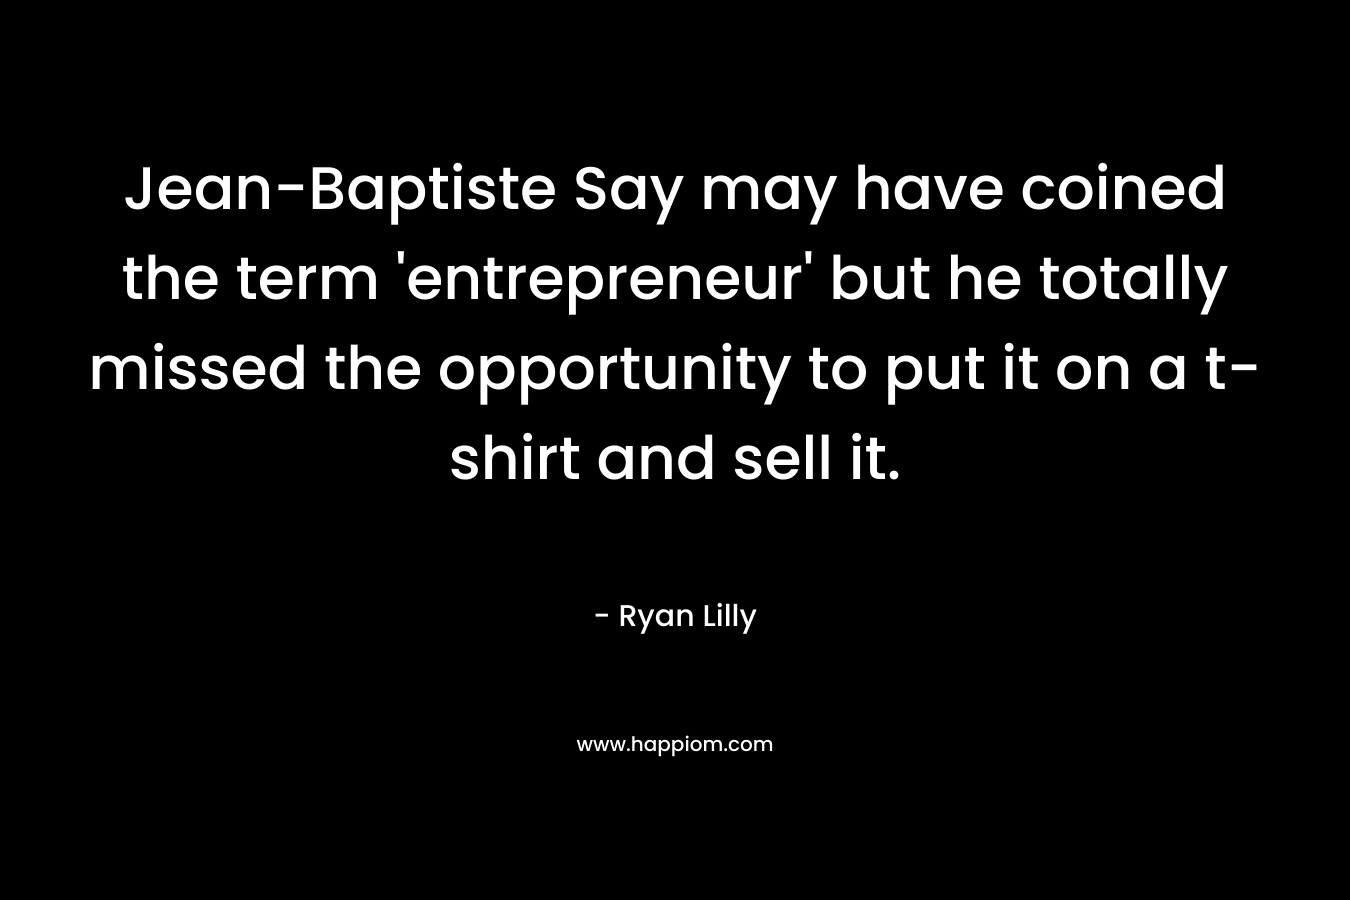 Jean-Baptiste Say may have coined the term ‘entrepreneur’ but he totally missed the opportunity to put it on a t-shirt and sell it. – Ryan Lilly